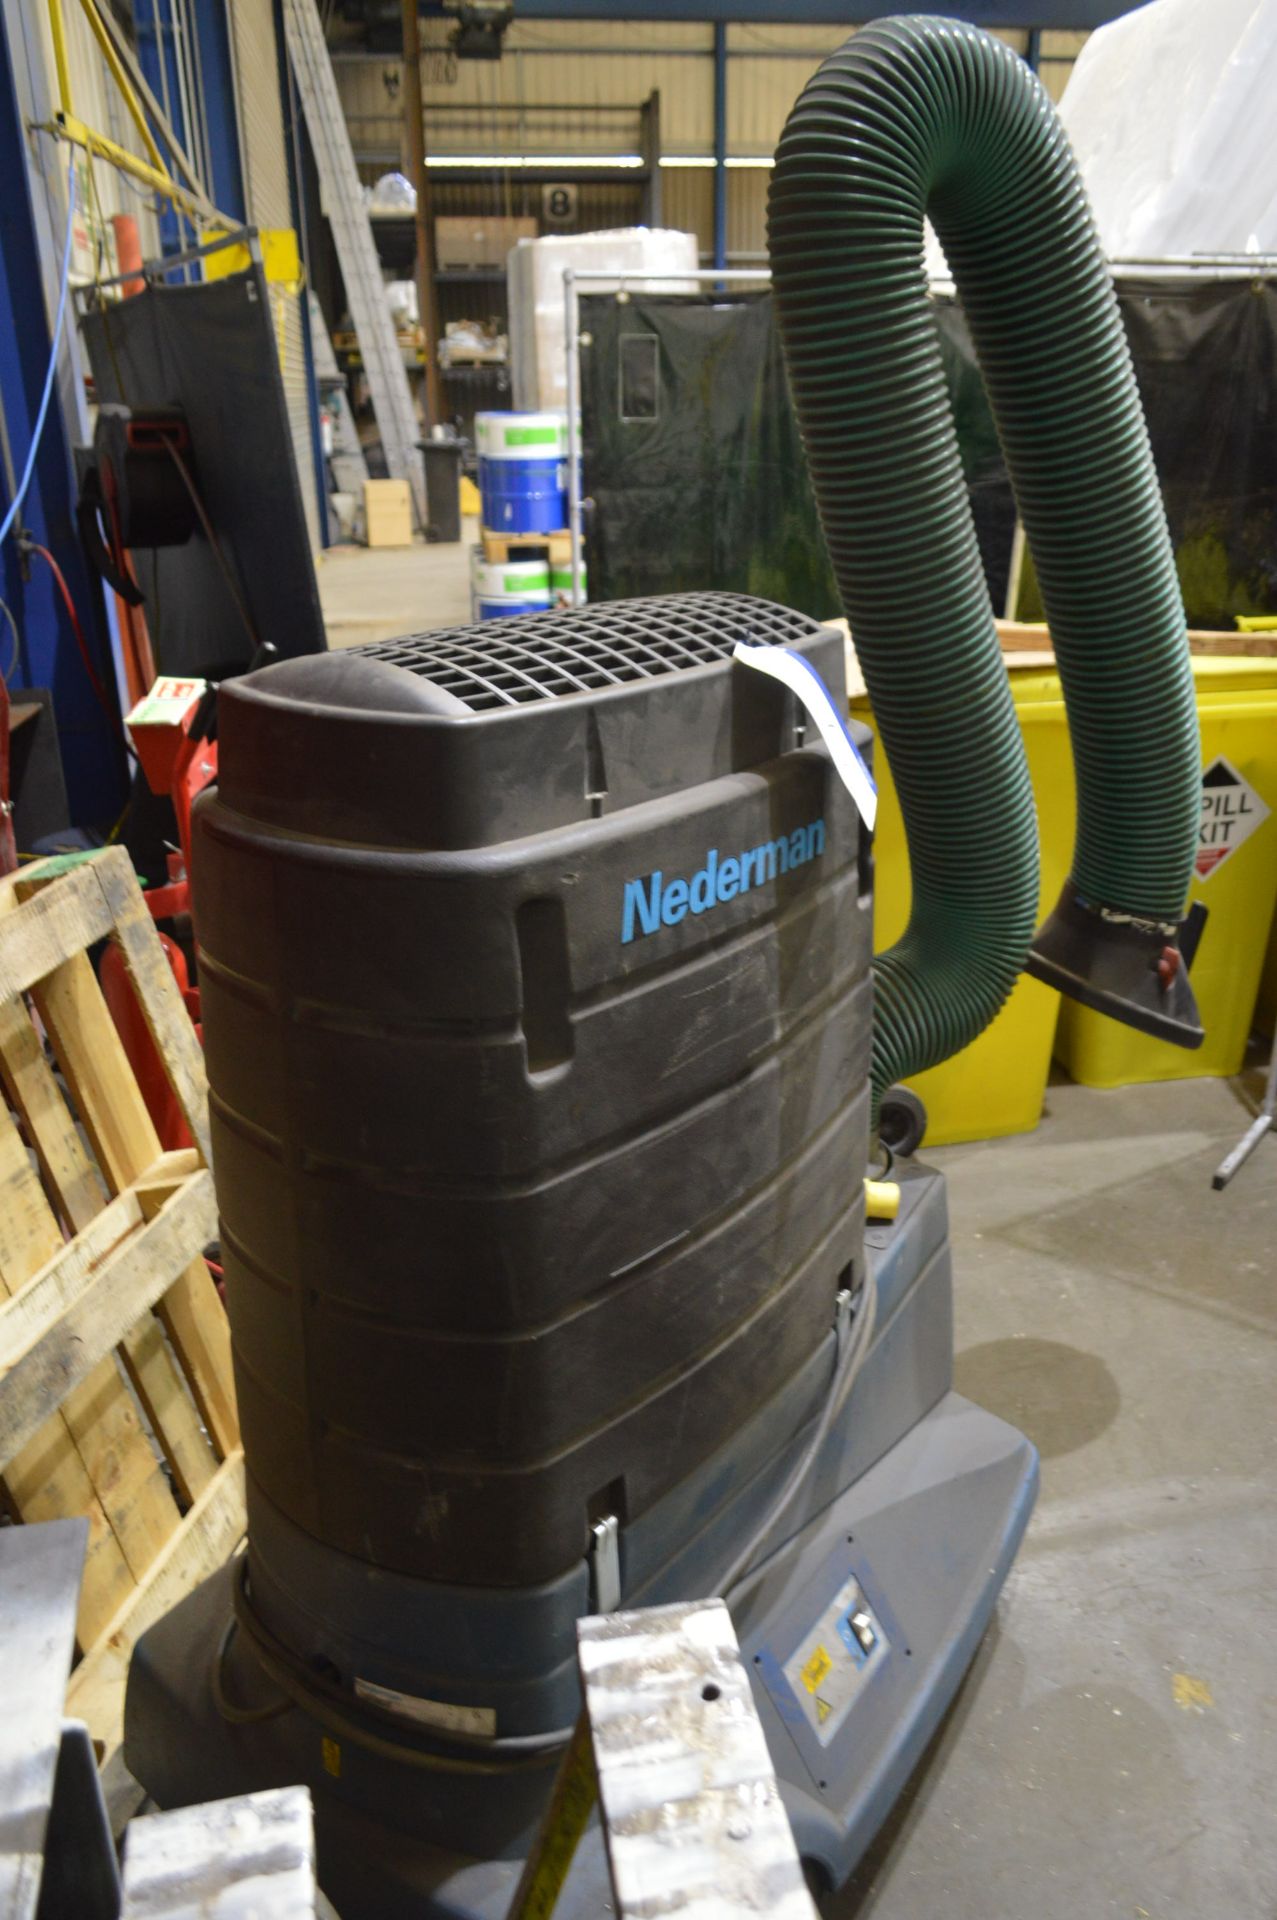 Nederman 13225-00 Mobile Fume Extraction Unit, serial no. 12624745 - Image 3 of 4